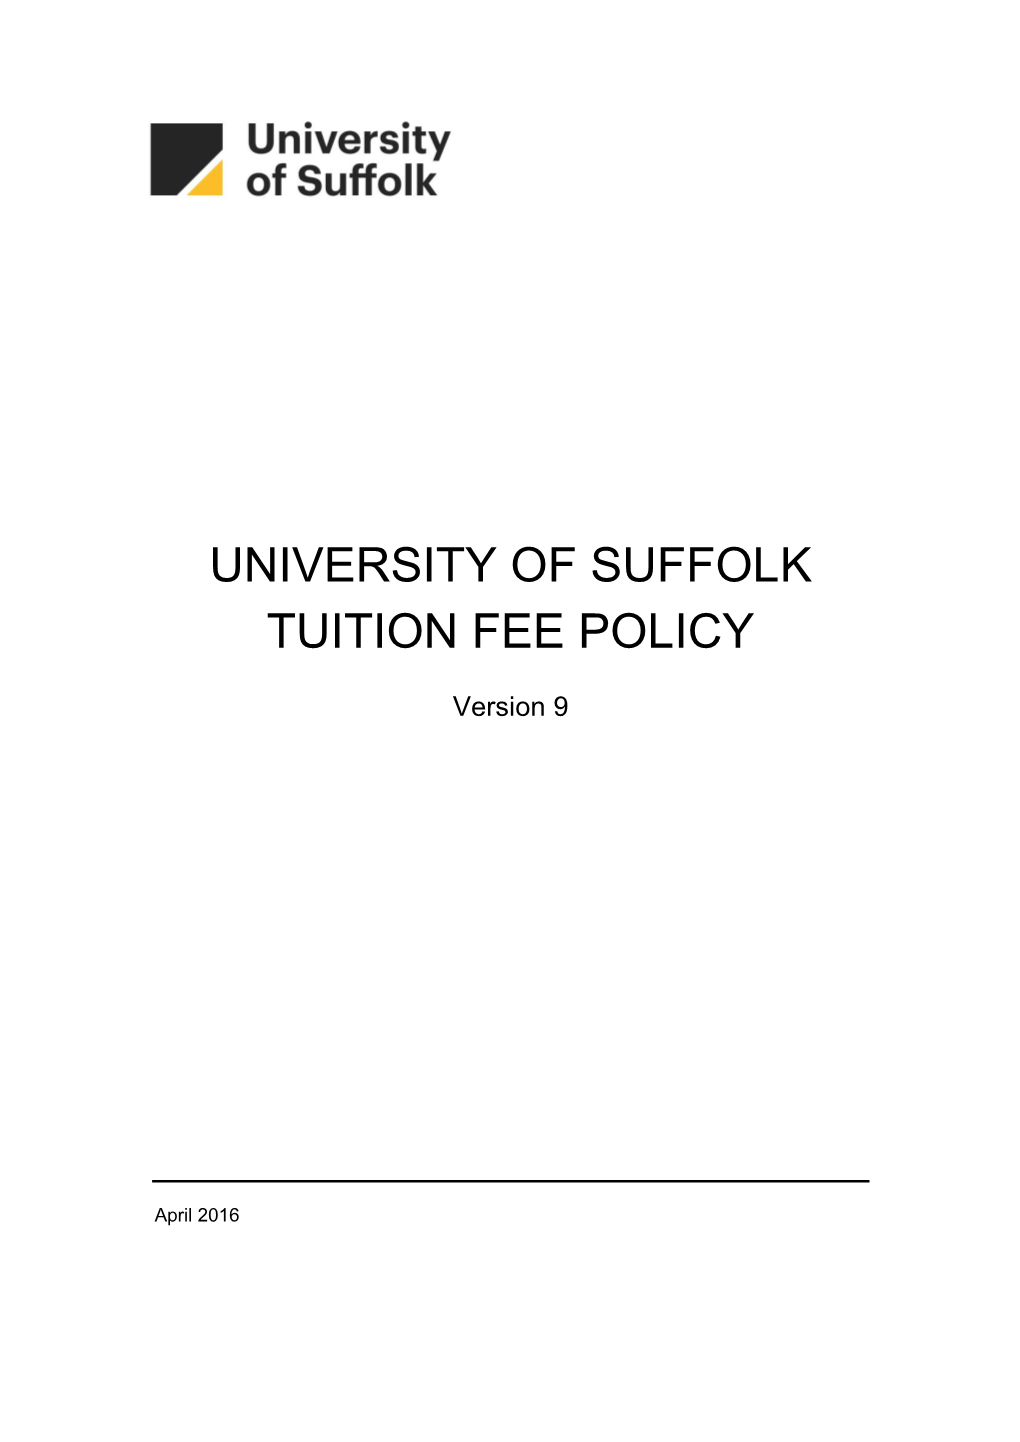 University of Suffolk Tuition Fee Policy